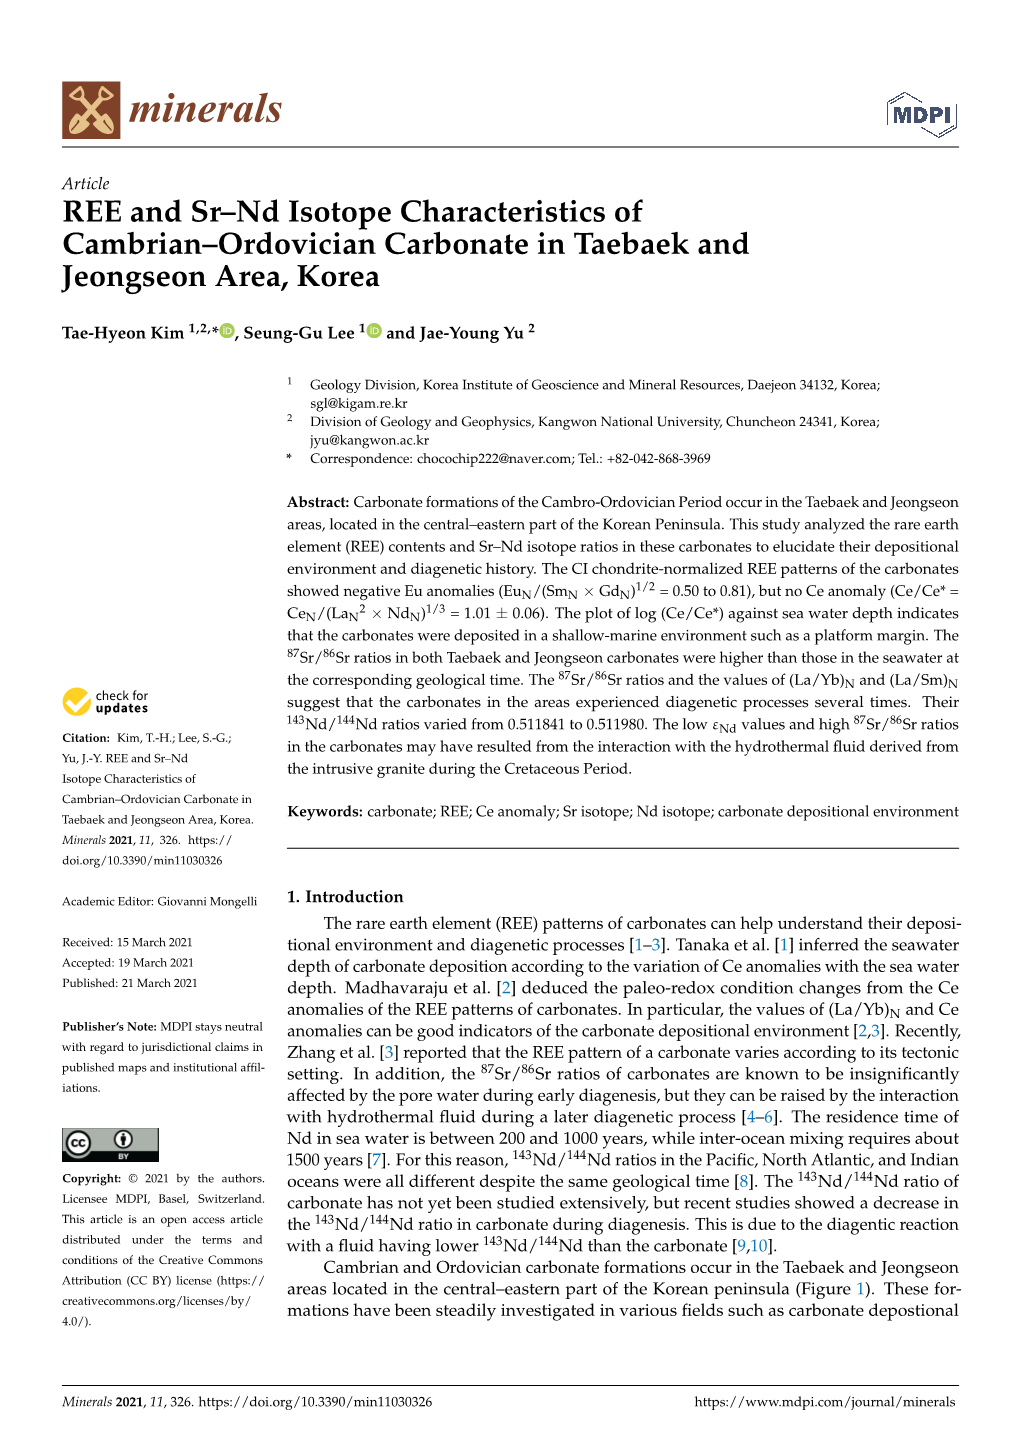 REE and Sr–Nd Isotope Characteristics of Cambrian–Ordovician Carbonate in Taebaek and Jeongseon Area, Korea